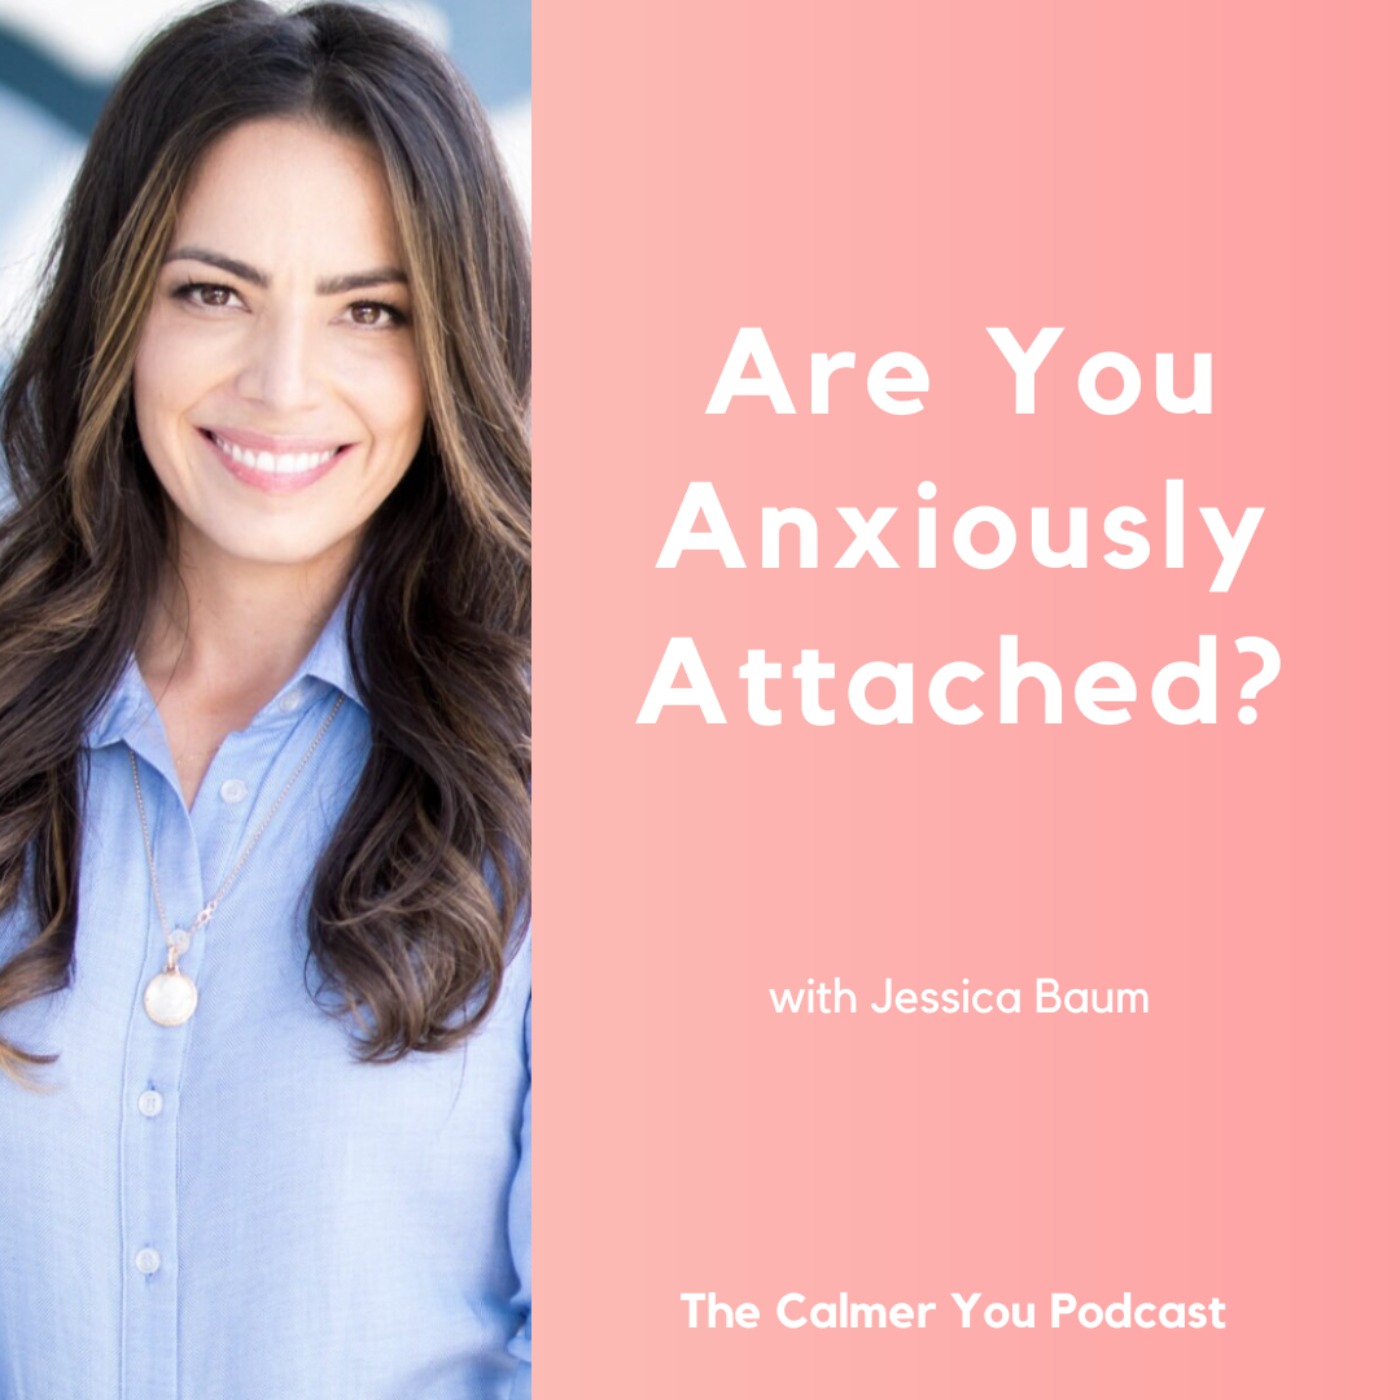 Ep 190. Are You Anxiously Attached? with Jessica Baum